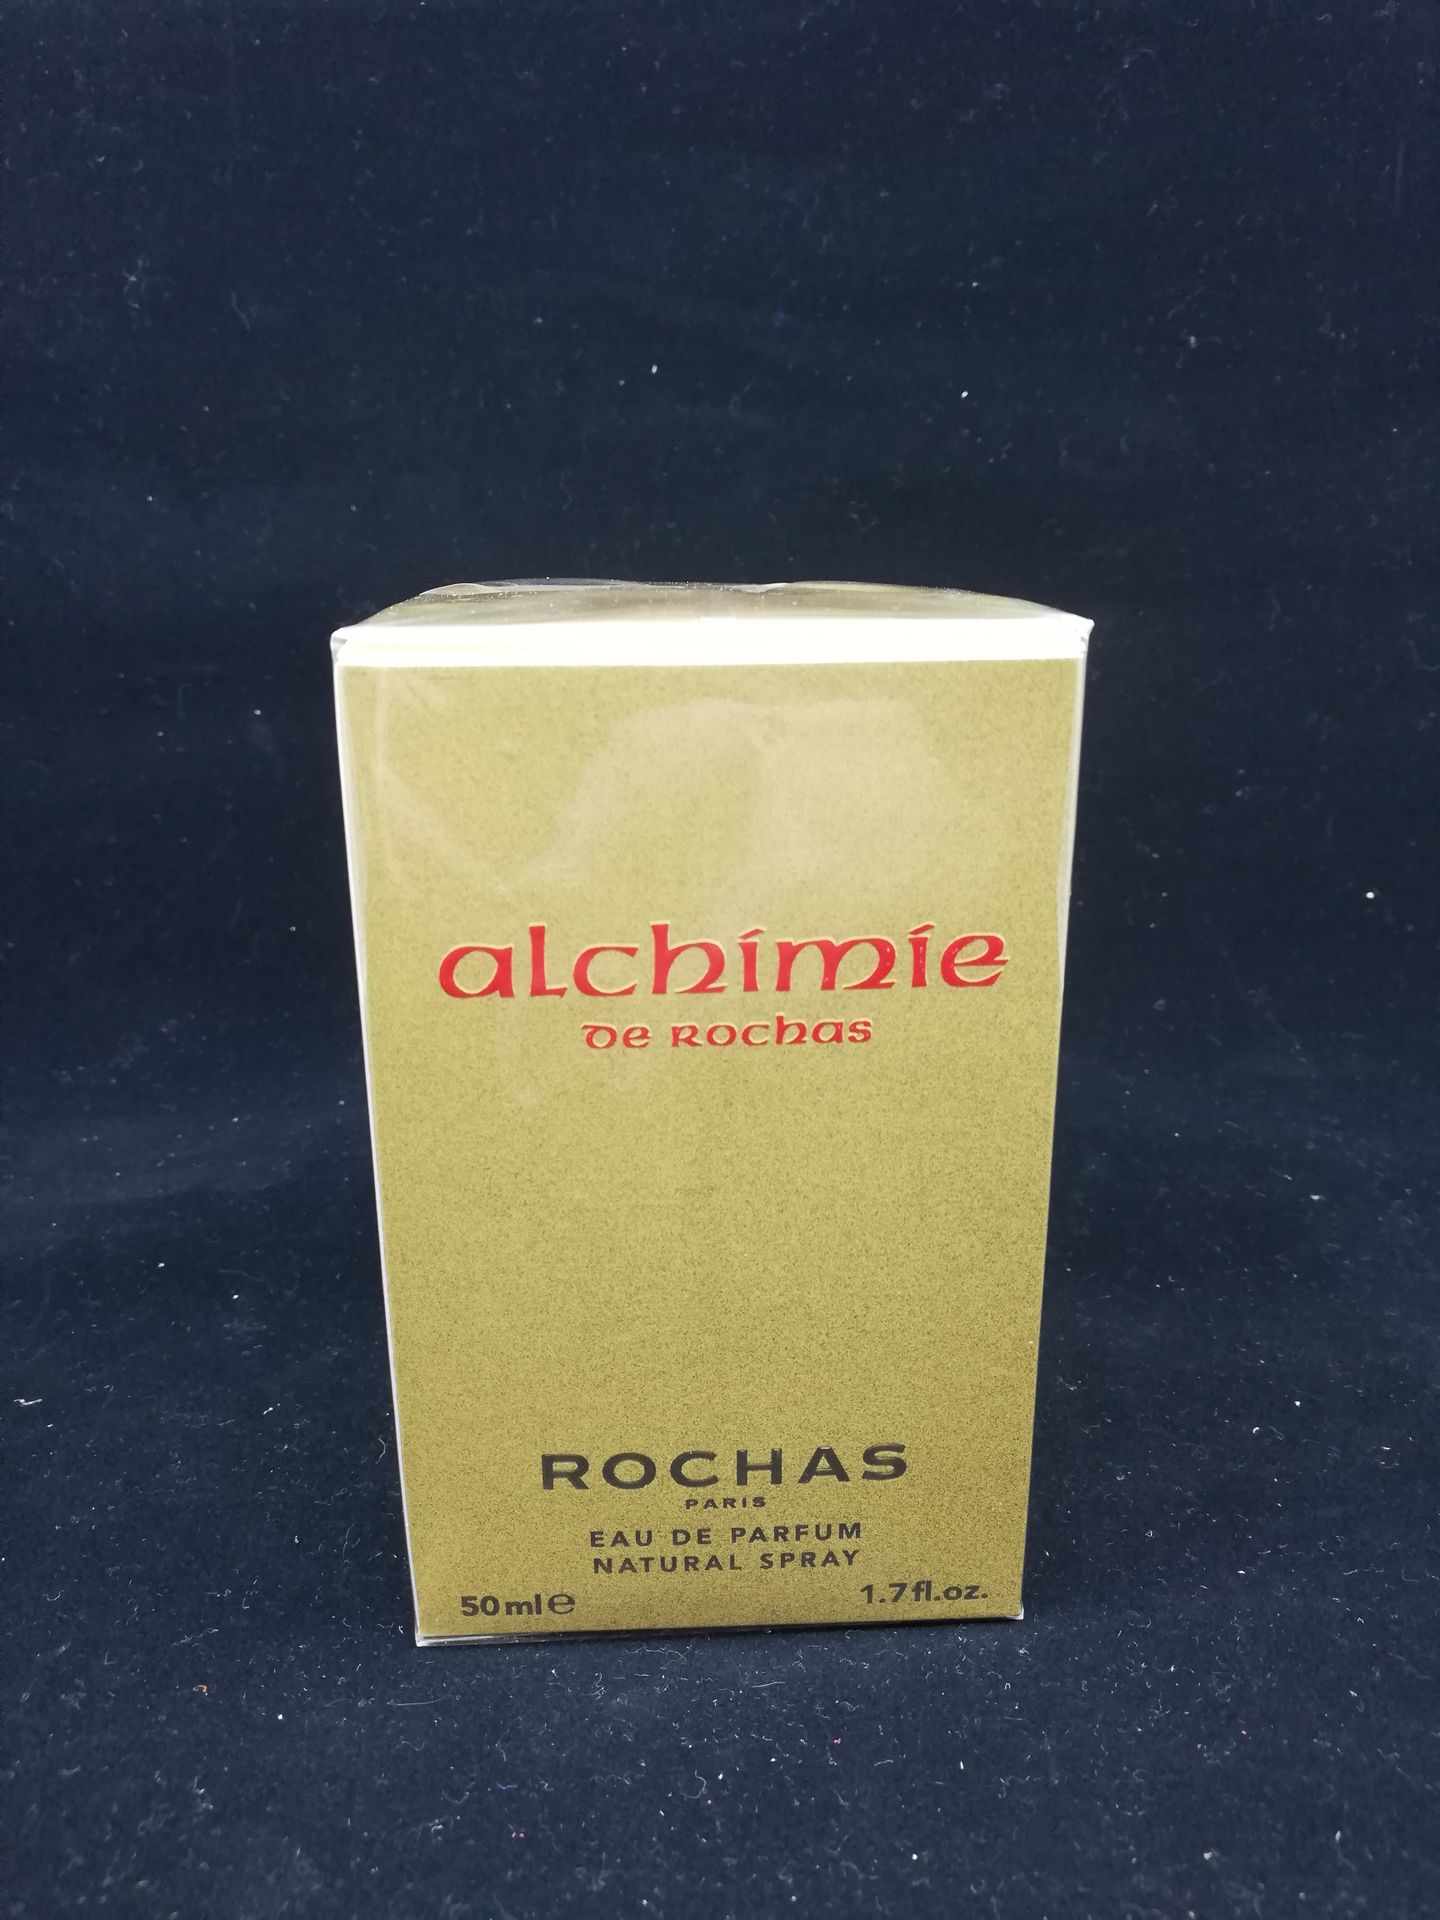 Null Rochas - "Alchimie" - (1998)

Presented in its cellophane-titled cardboard &hellip;